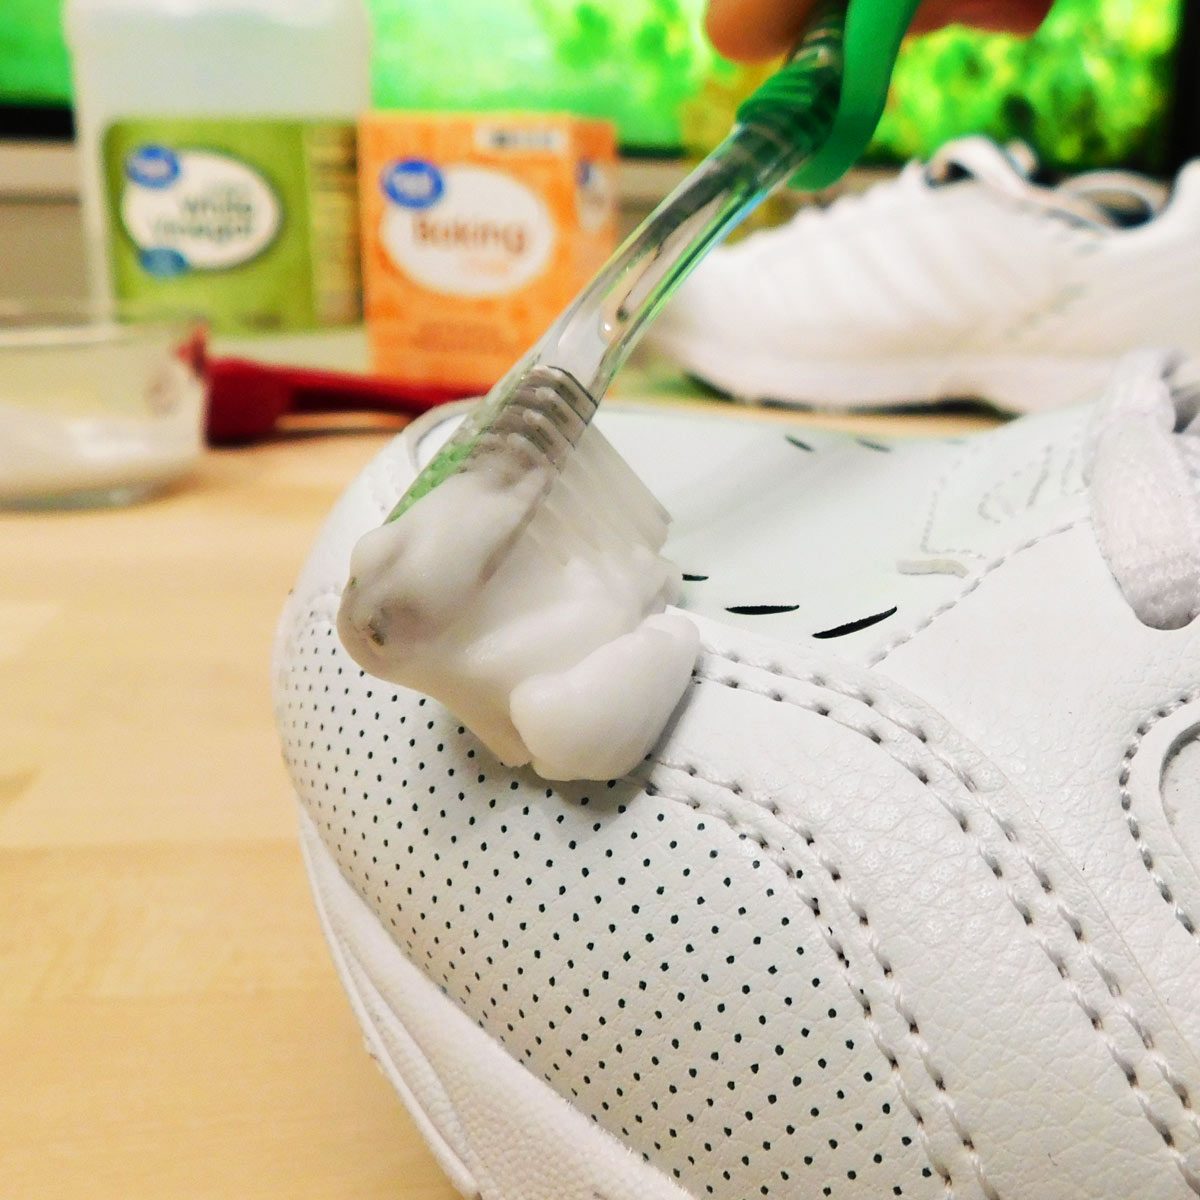 vinegar and baking soda to clean white shoes